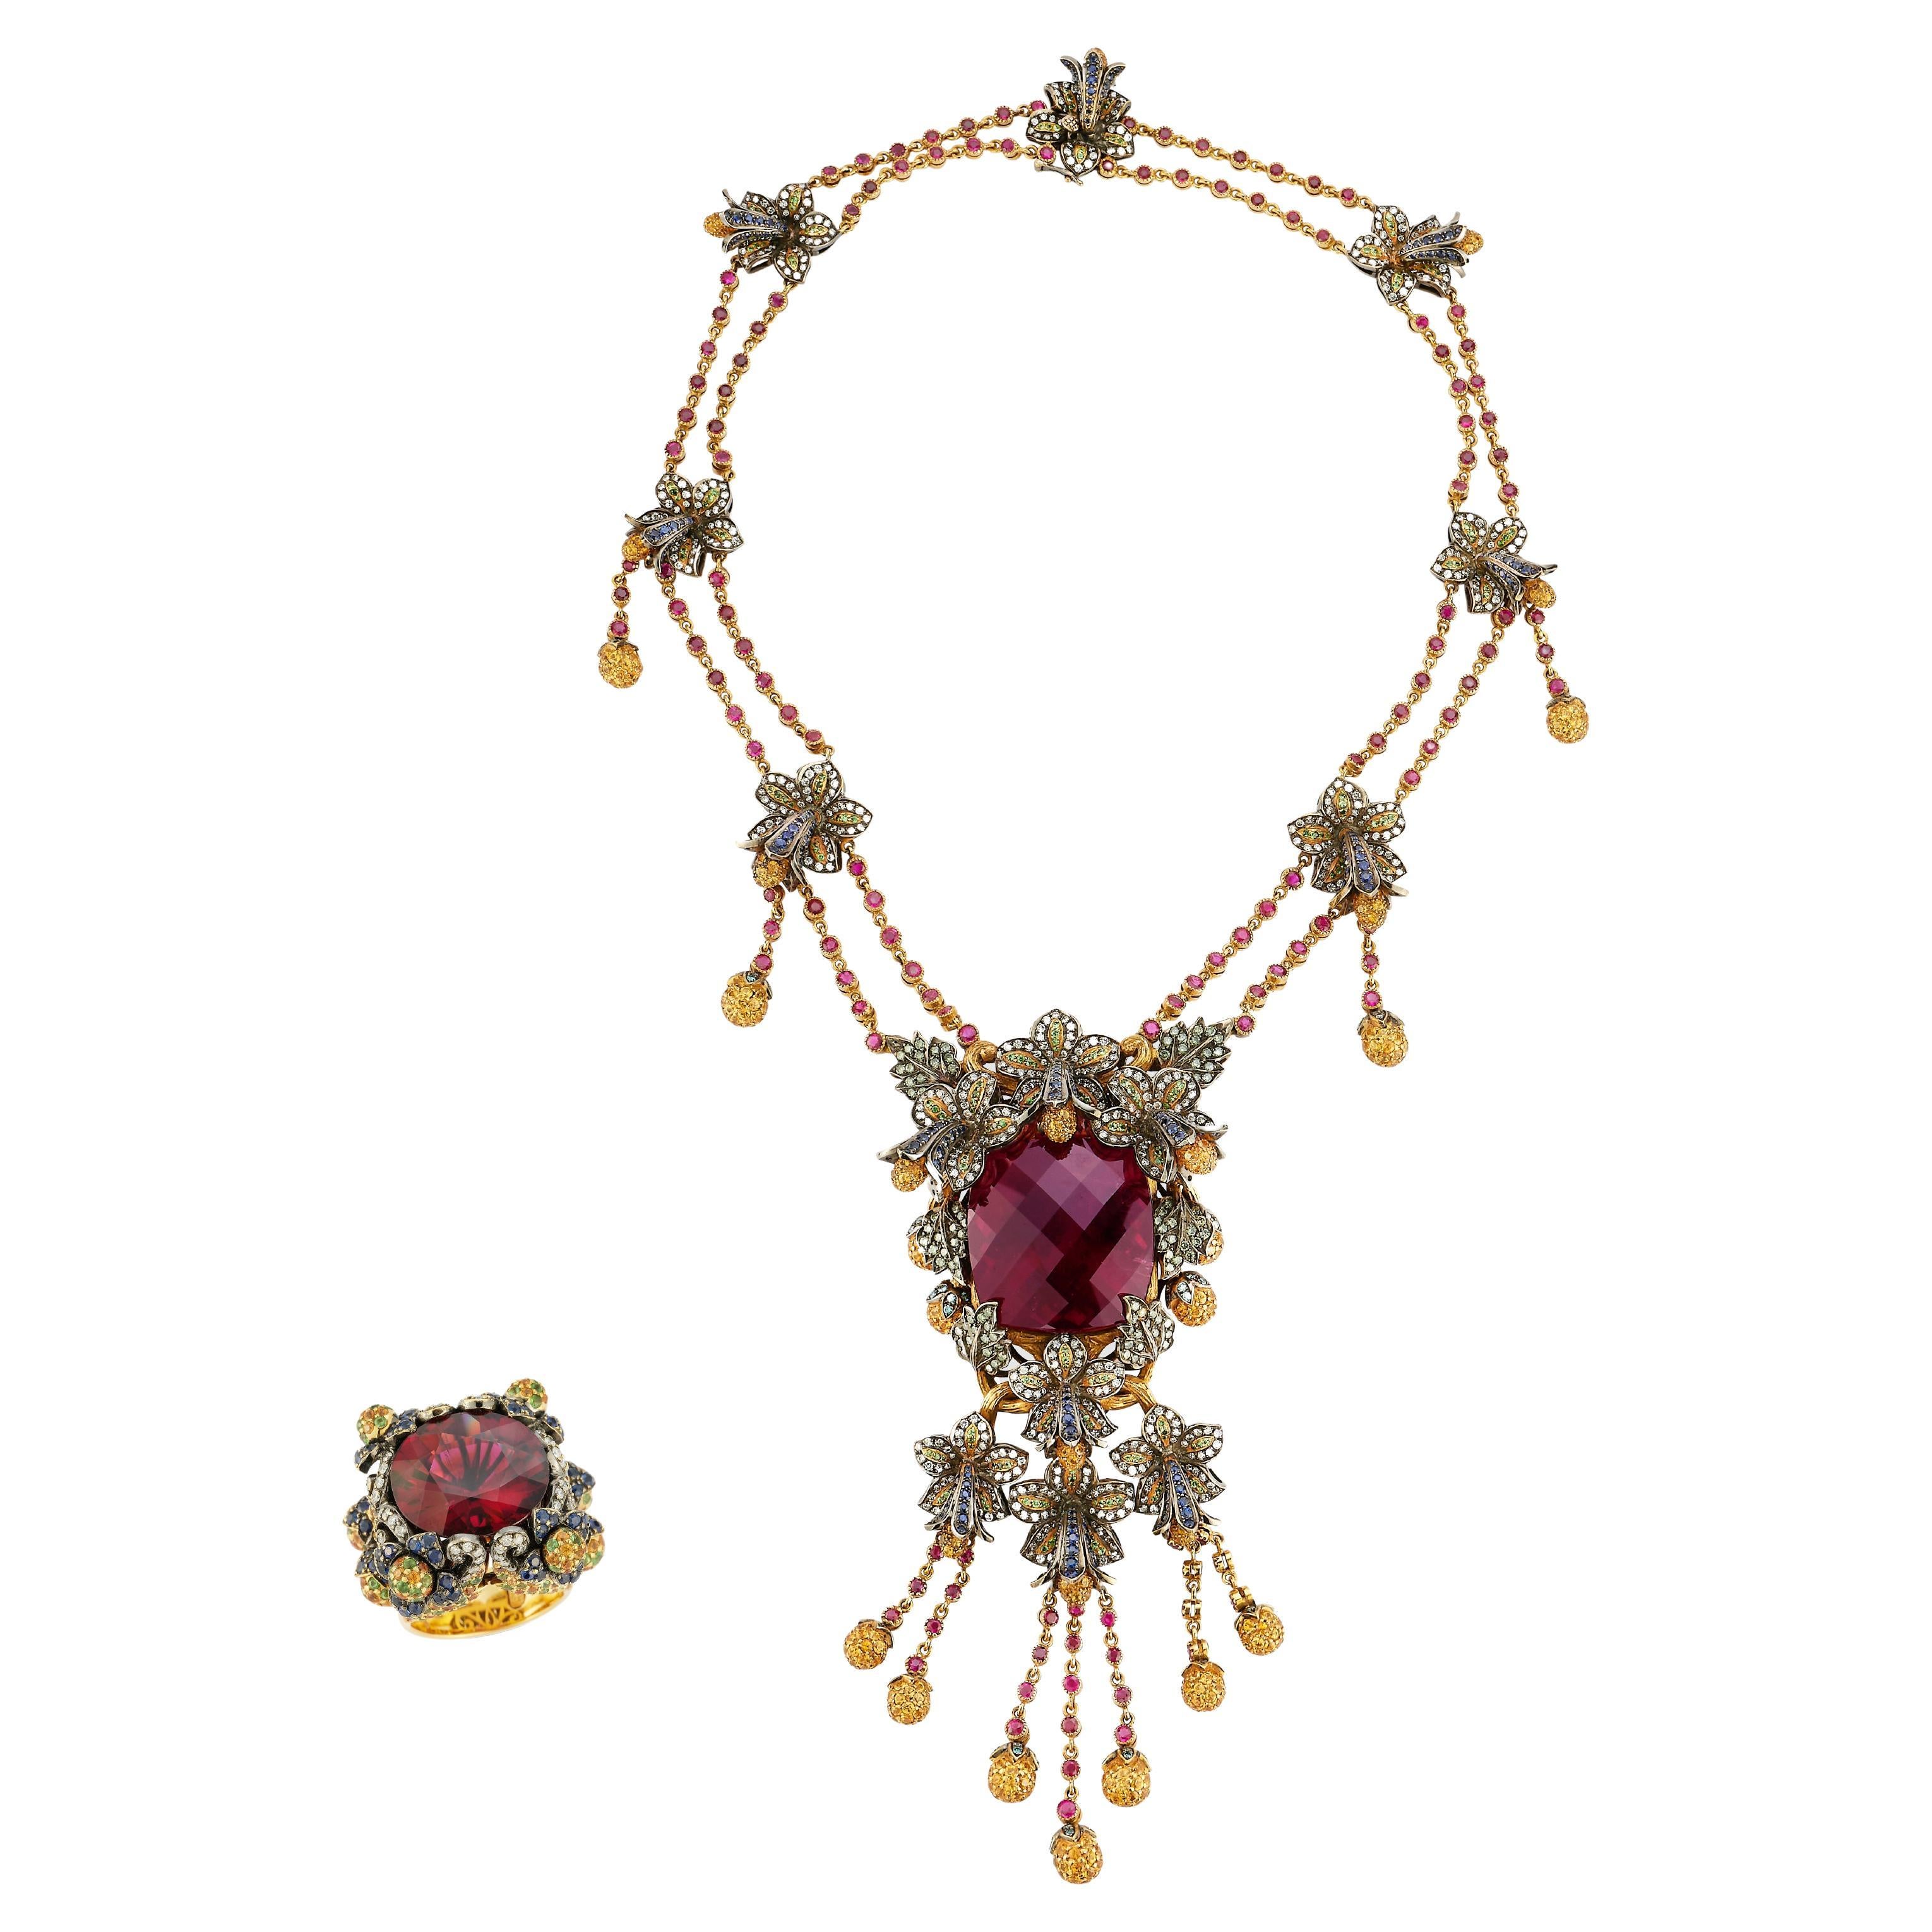 Important 125 Carat Rubellite Necklace And Ring Set  For Sale